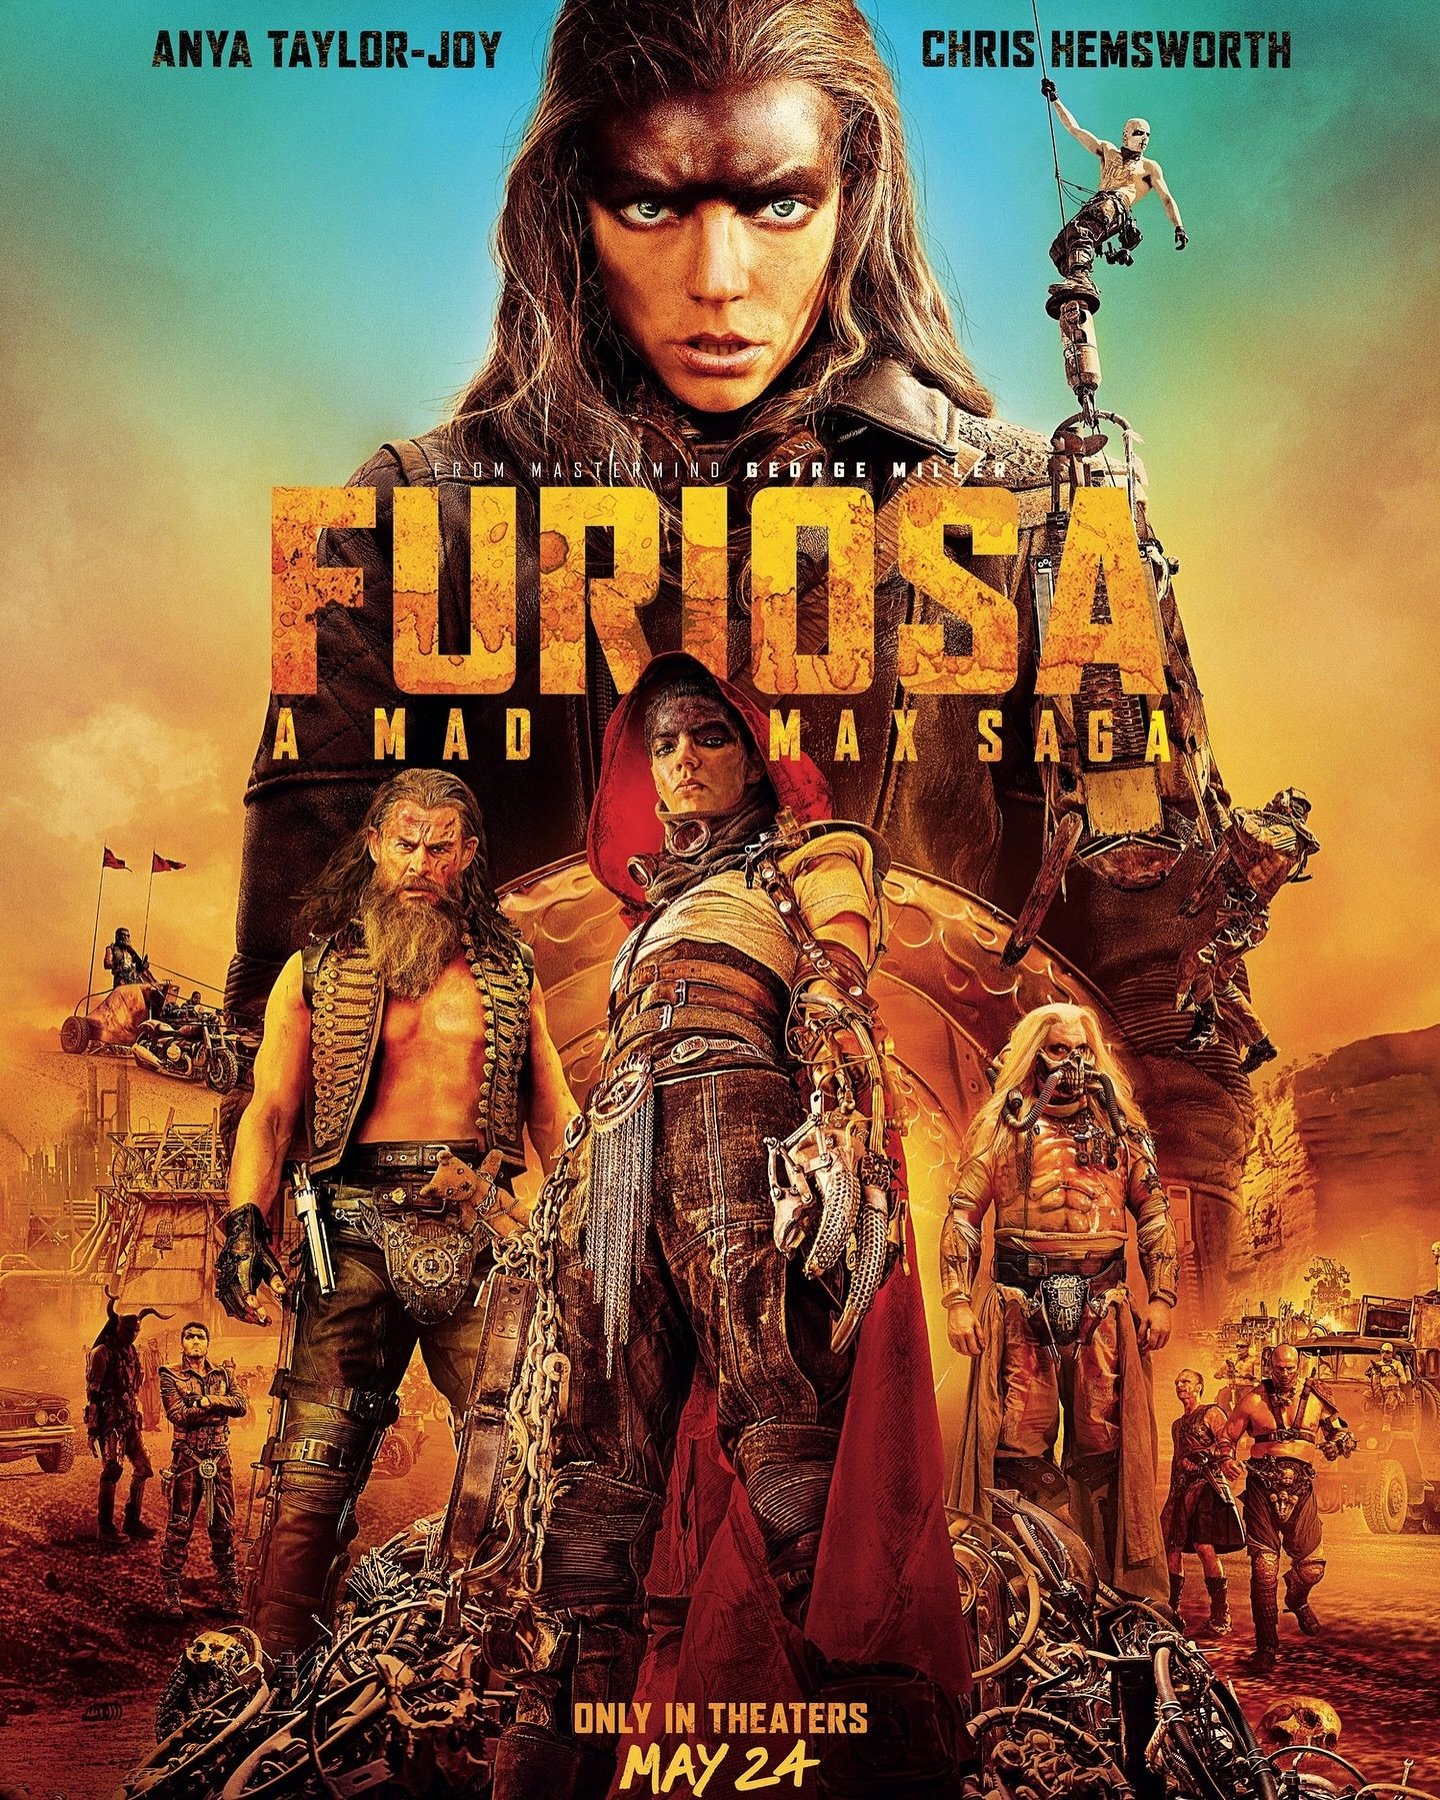 Average Socialite is a proud advanced screening partner of Warner Bros. Pictures Furiosa: A Mad Max Saga on May 20. Grab your free tickets now at our link in bio &amp; subscribe to our newsletter for more upcoming events!

Witness the Epic Battle for